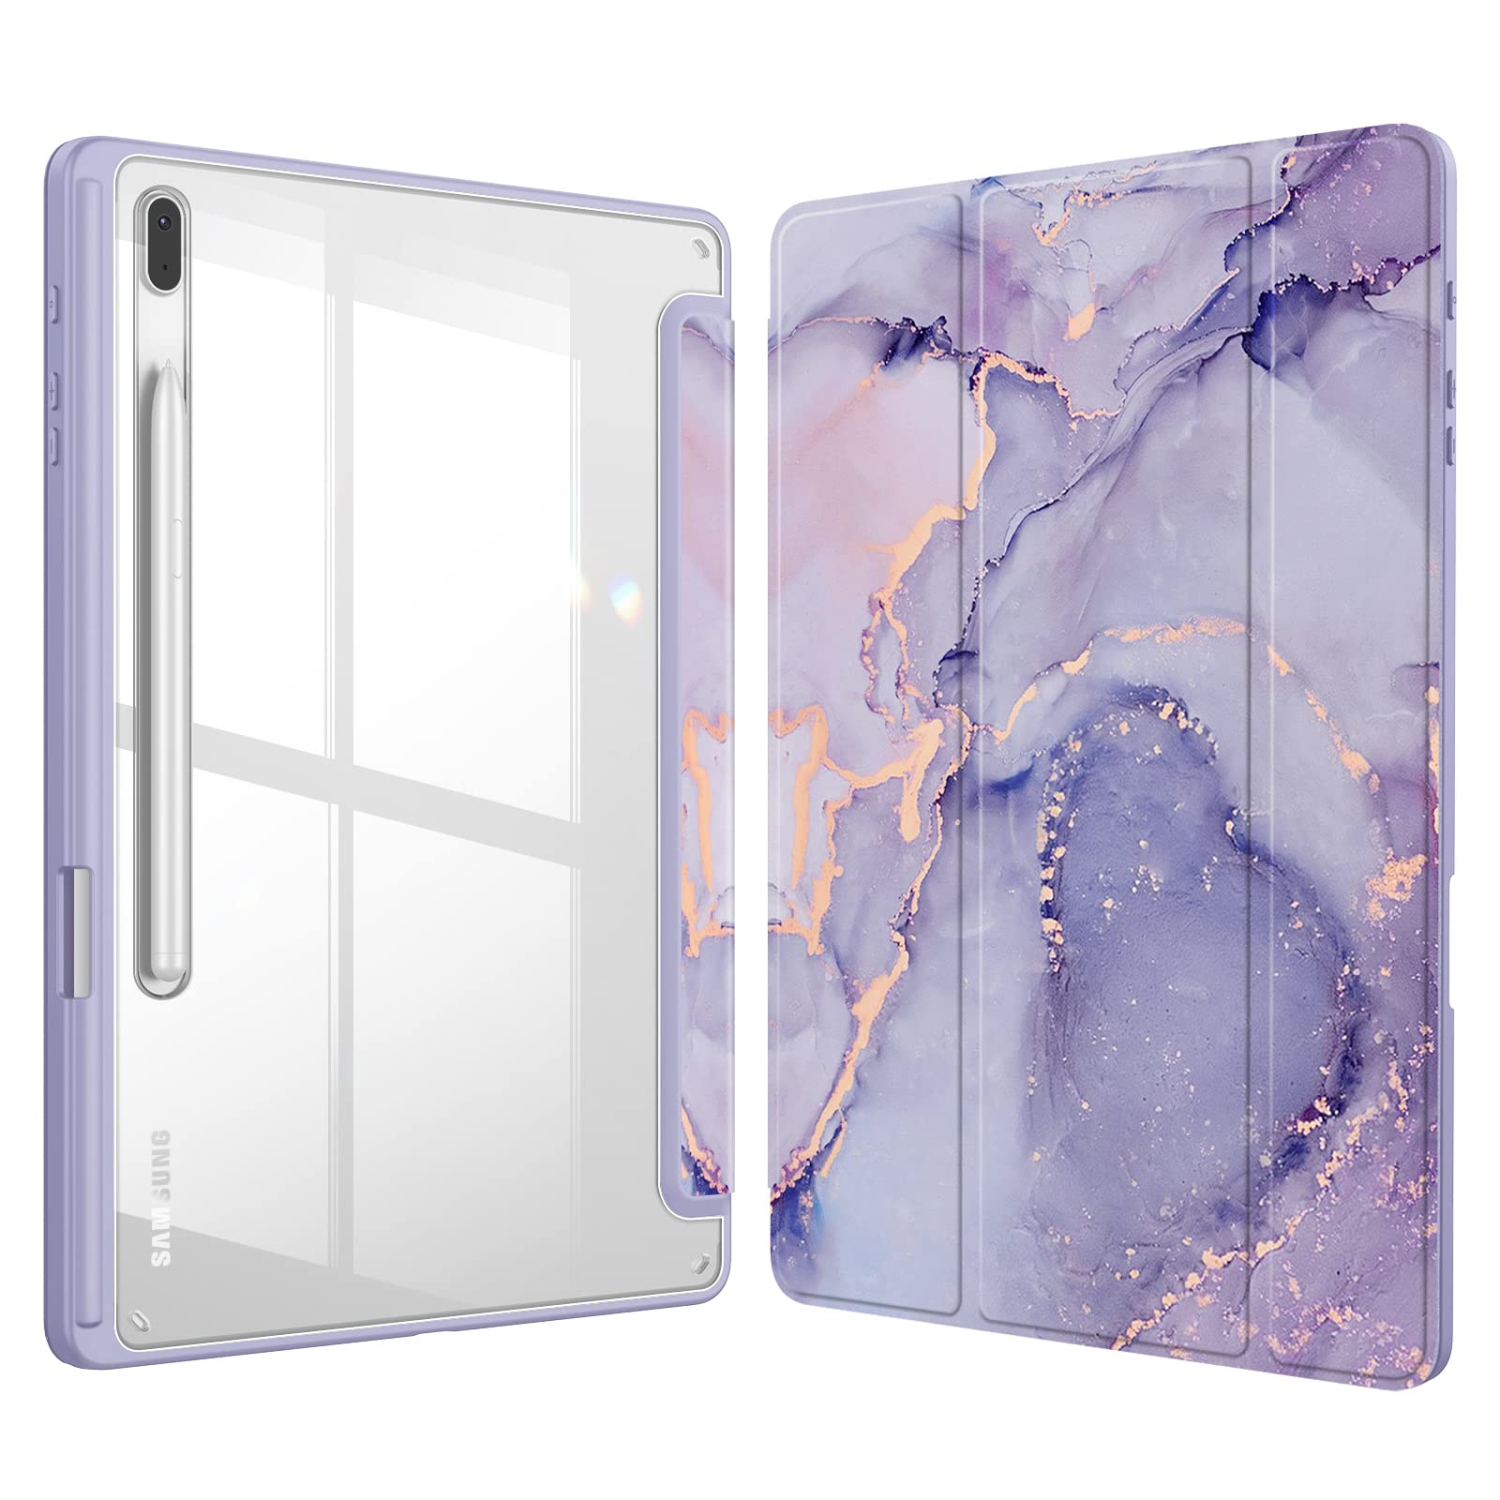 Hybrid Slim Case for Samsung Galaxy Tab S8 Plus 2022/S7 FE 2021/S7 Plus 2020 12.4 inch with S Pen Holder, Shockproof Cover with Clear Transparent Back Shell, Auto Wake/Sleep (Lilac